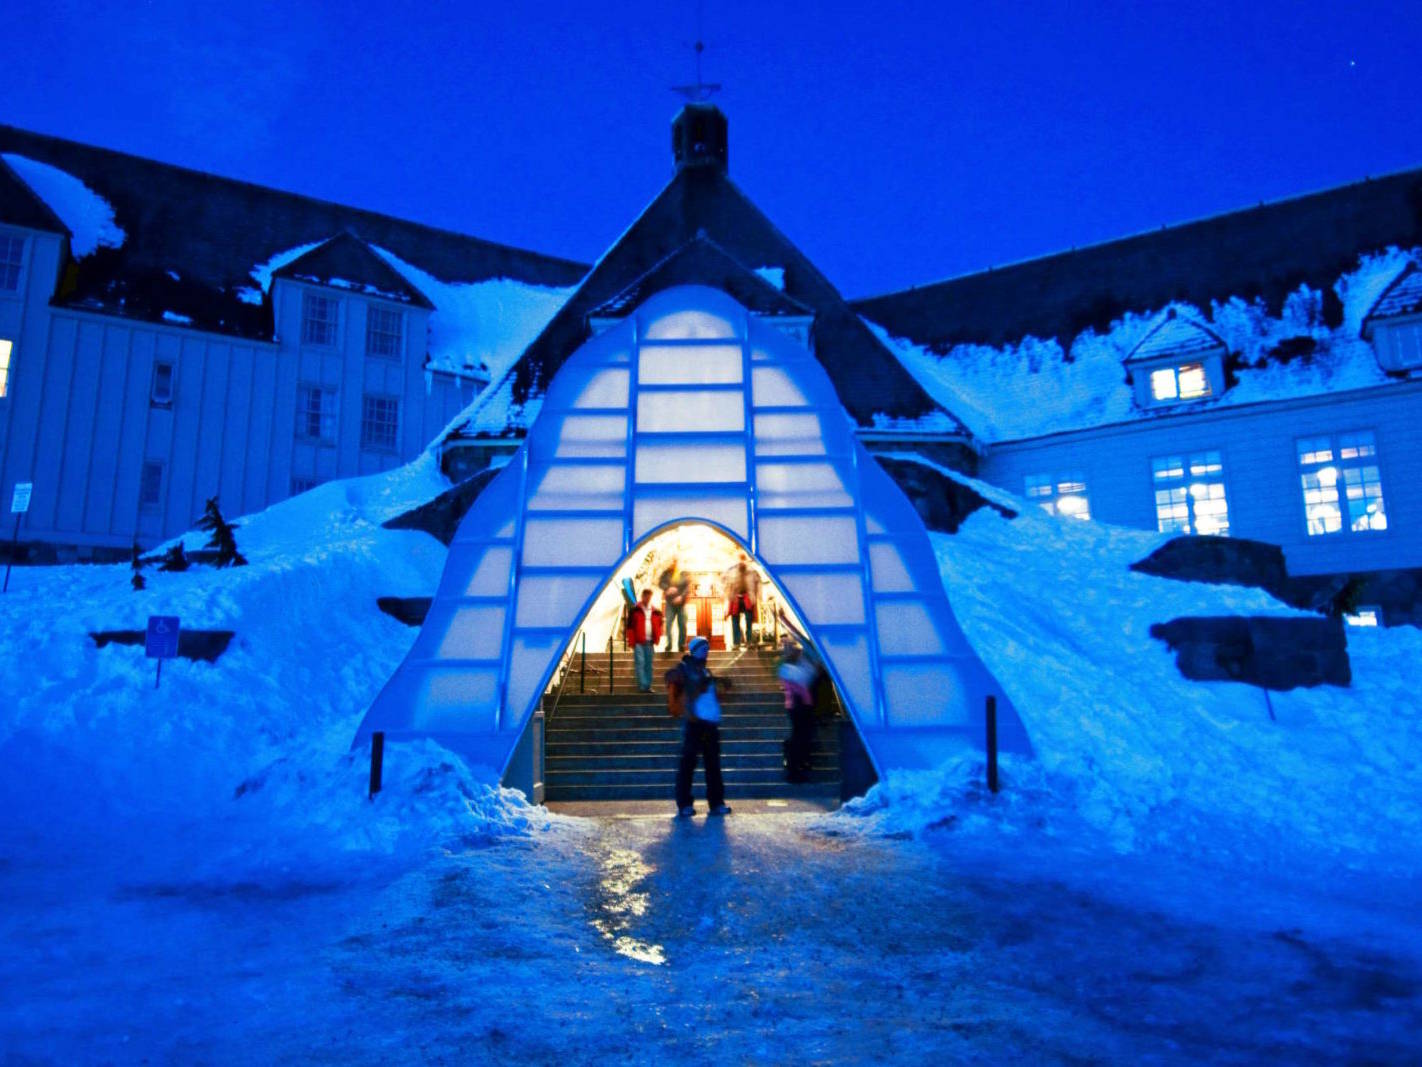 Timberline Lodge Winter Entrance with alpine winter glow